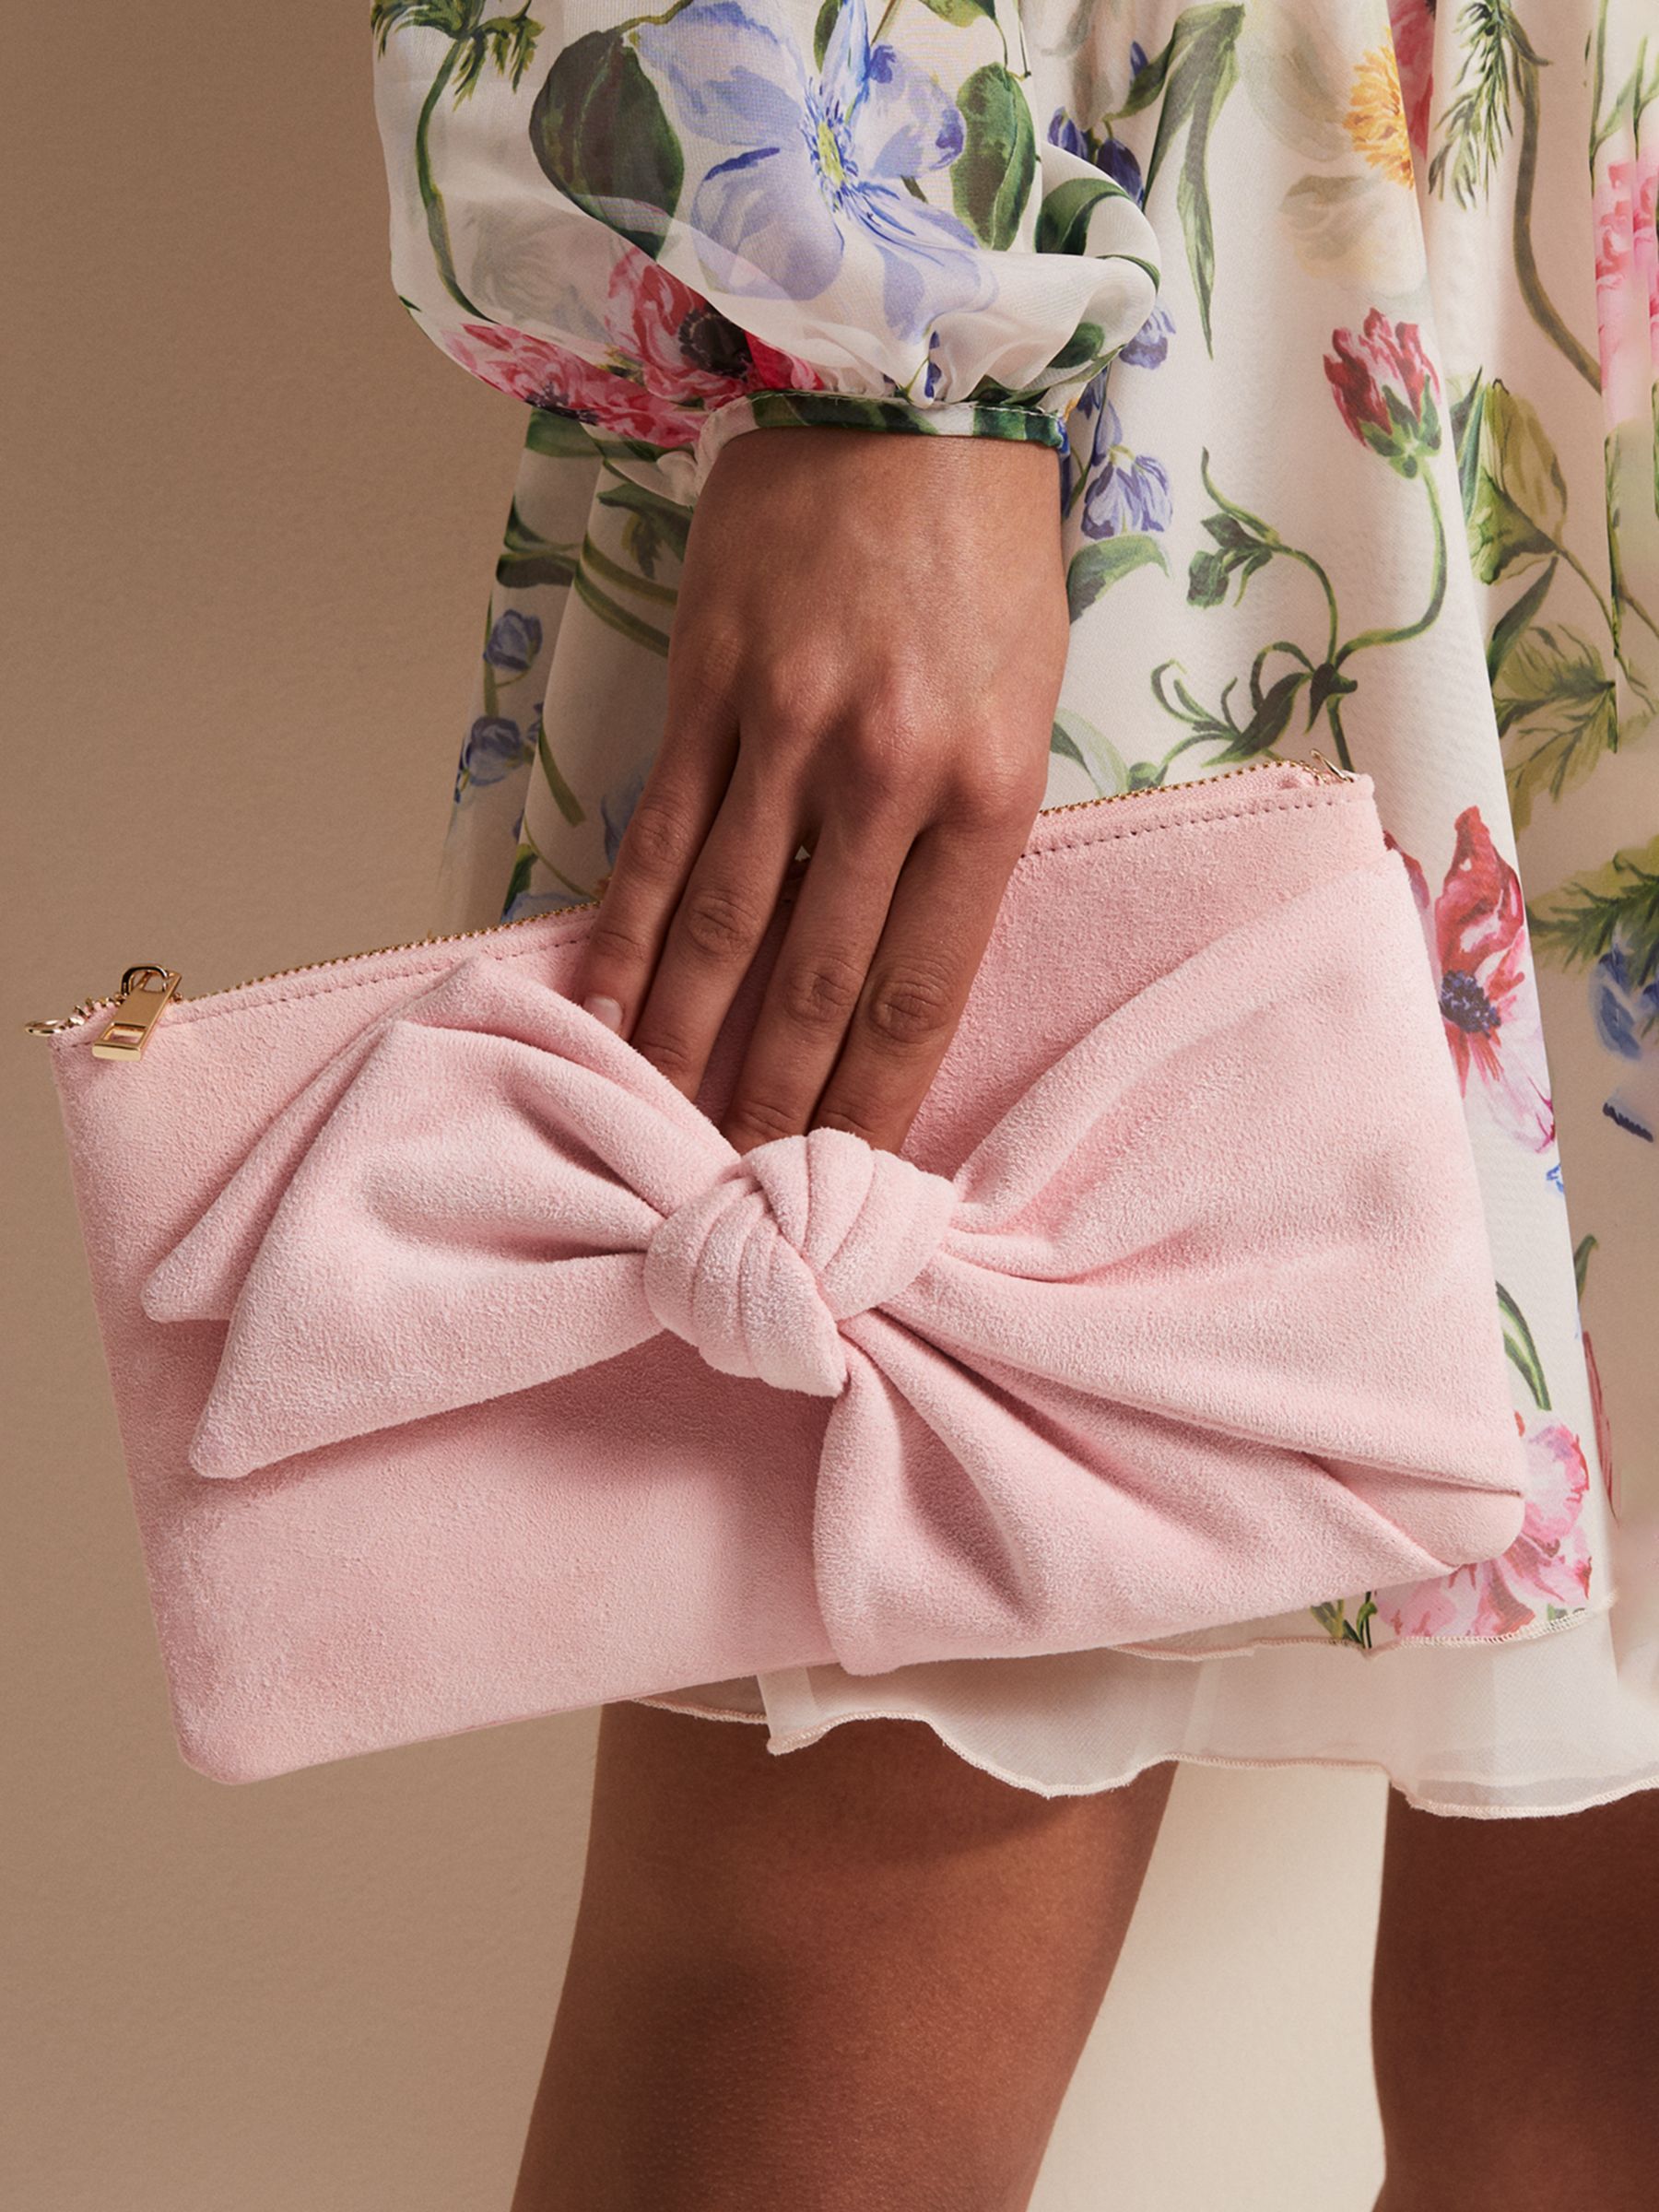 Buy Phase Eight Suede Bow Clutch, Pink Online at johnlewis.com